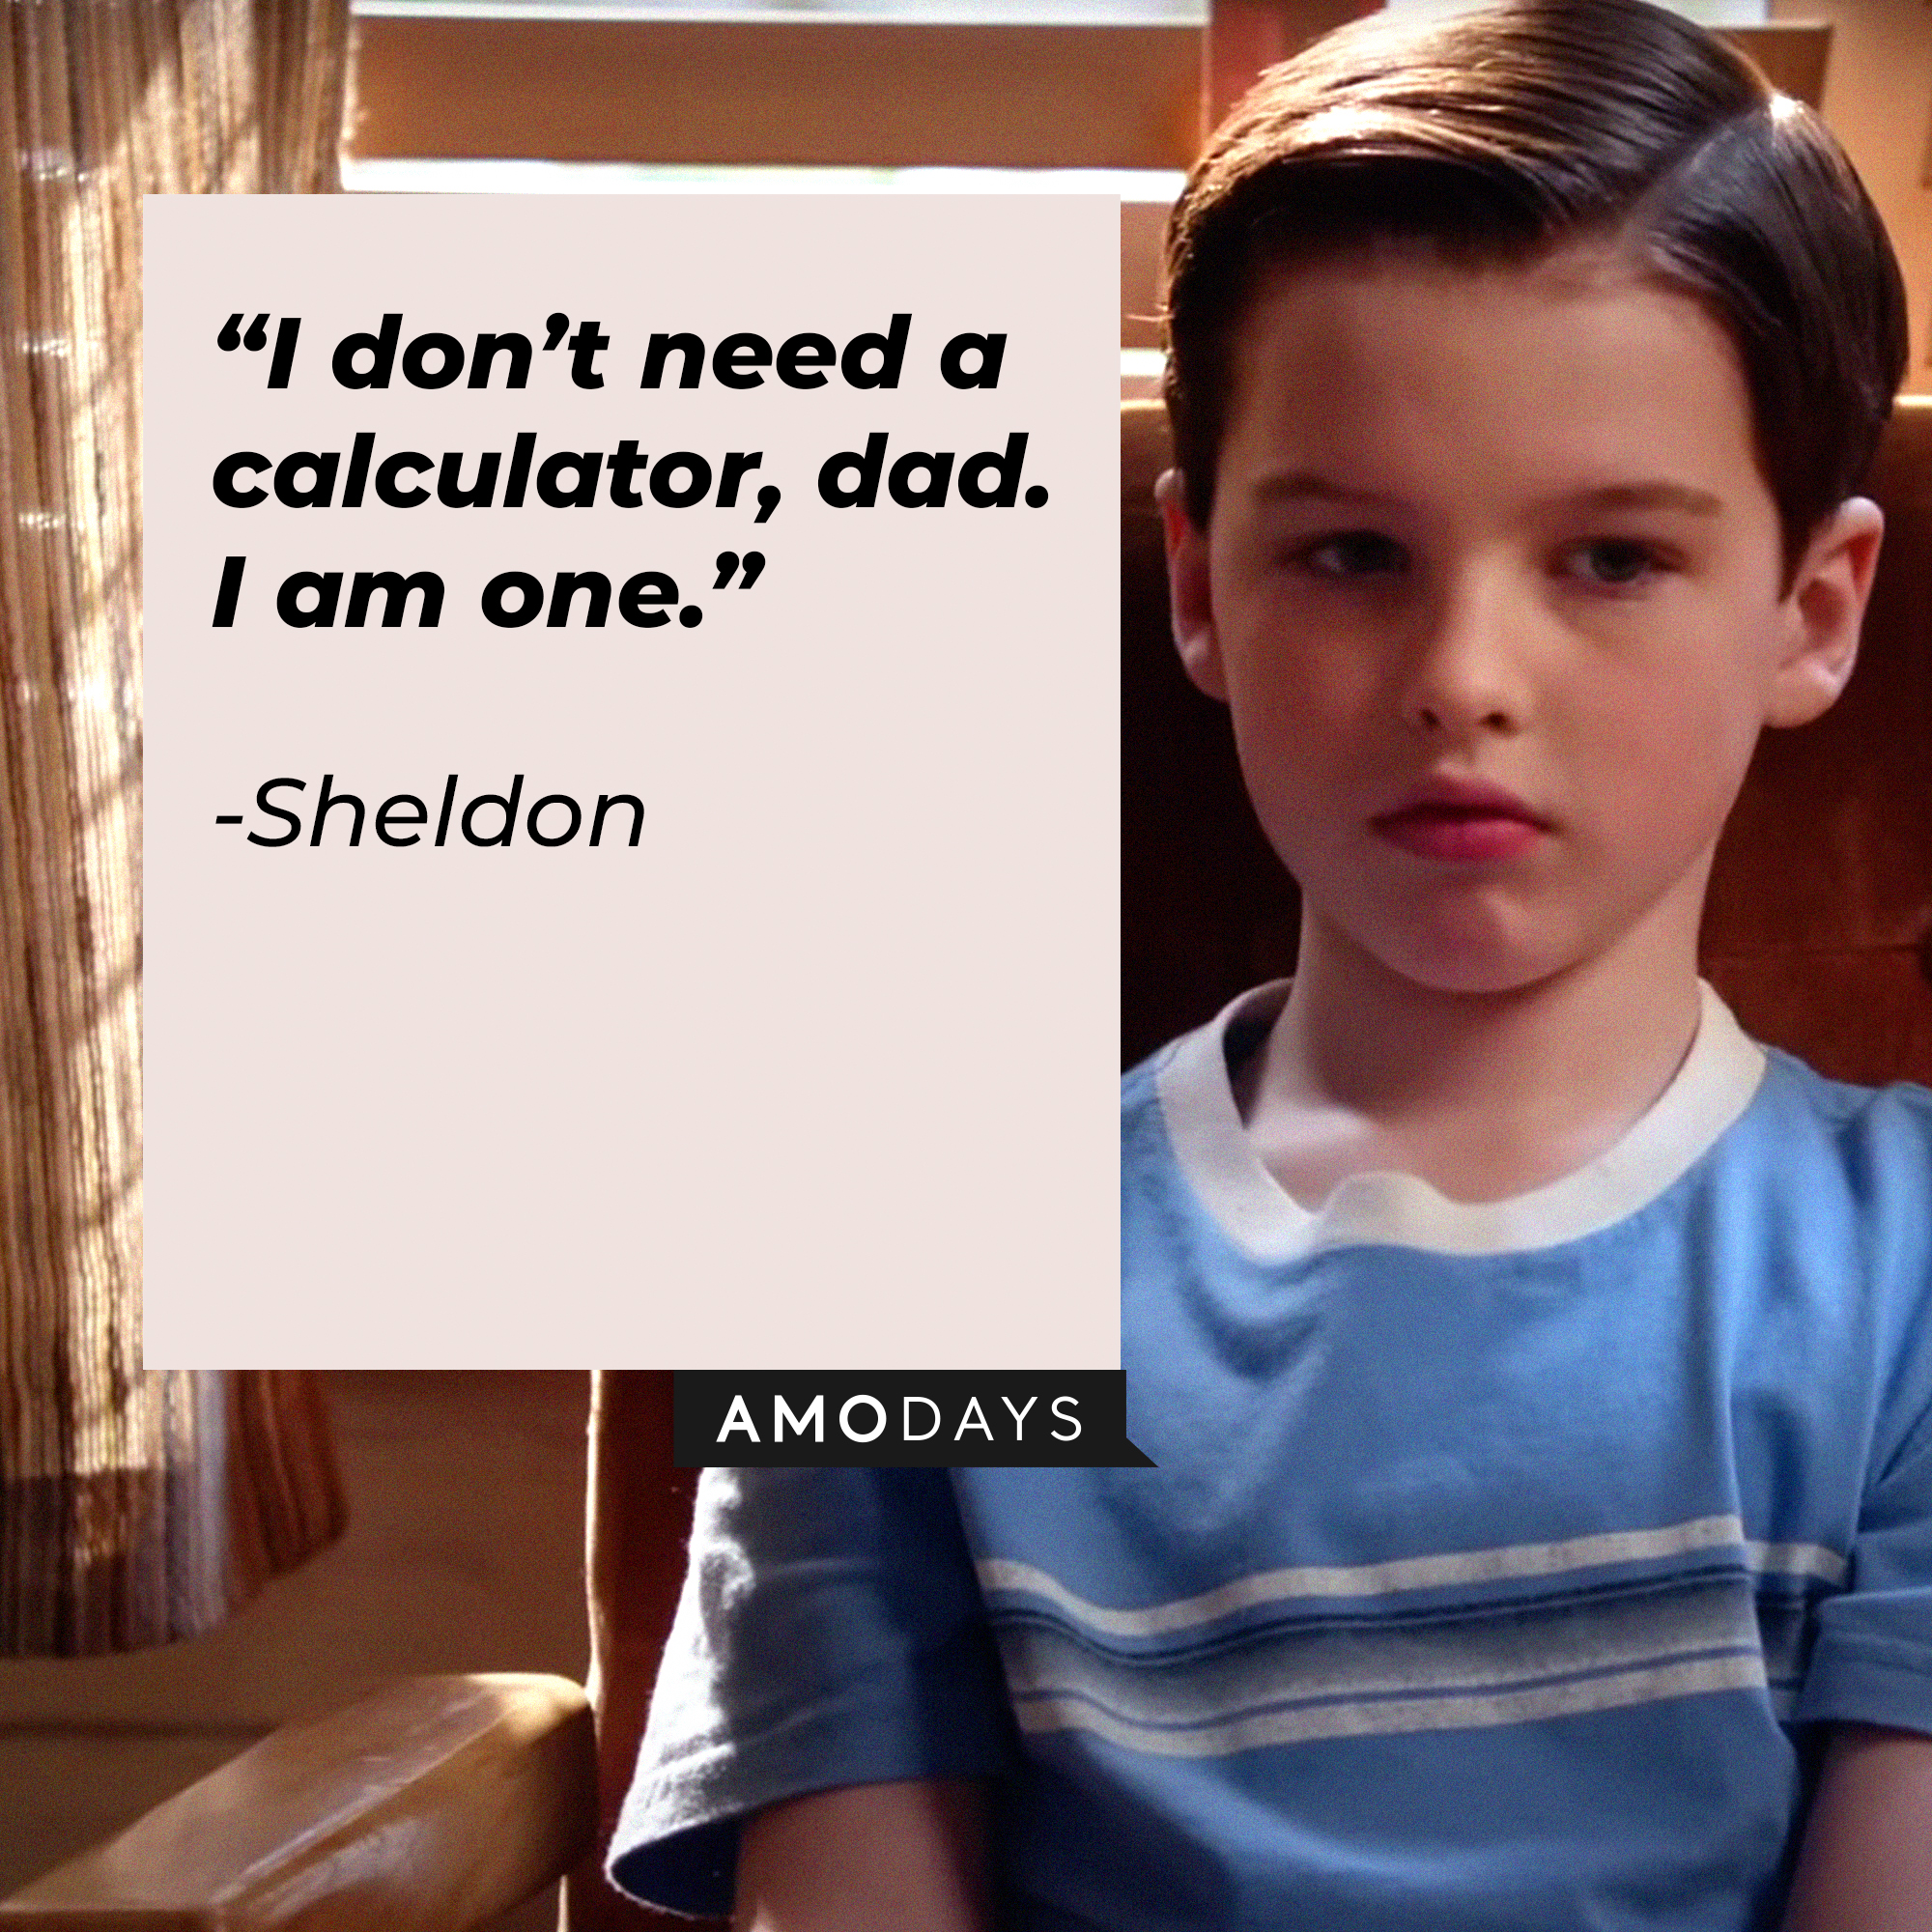 Sheldon's quote: “I don’t need a calculator, dad. I am one.” | Source: facebook.com/YoungSheldonCBS